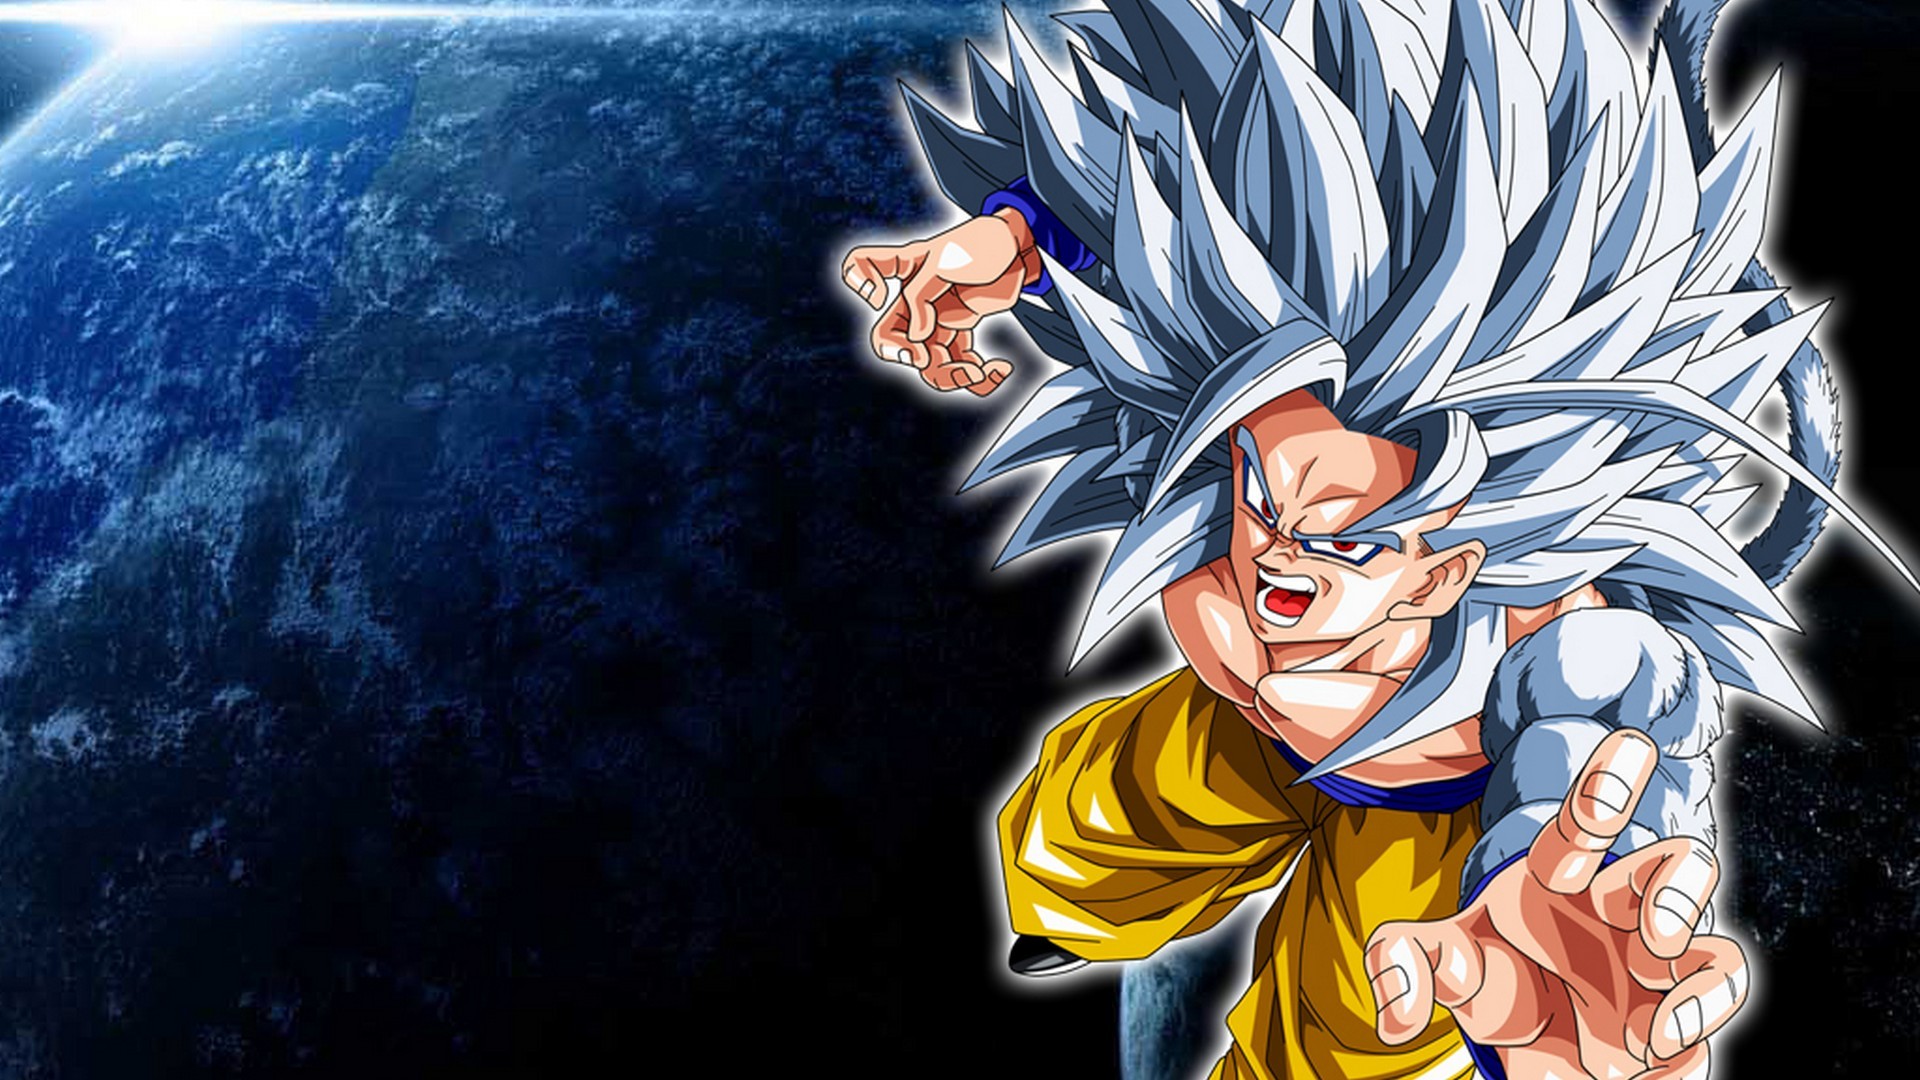 Goku Super Saiyan 5 Wallpaper with image resolution 1920x1080 pixel. You can use this wallpaper as background for your desktop Computer Screensavers, Android or iPhone smartphones